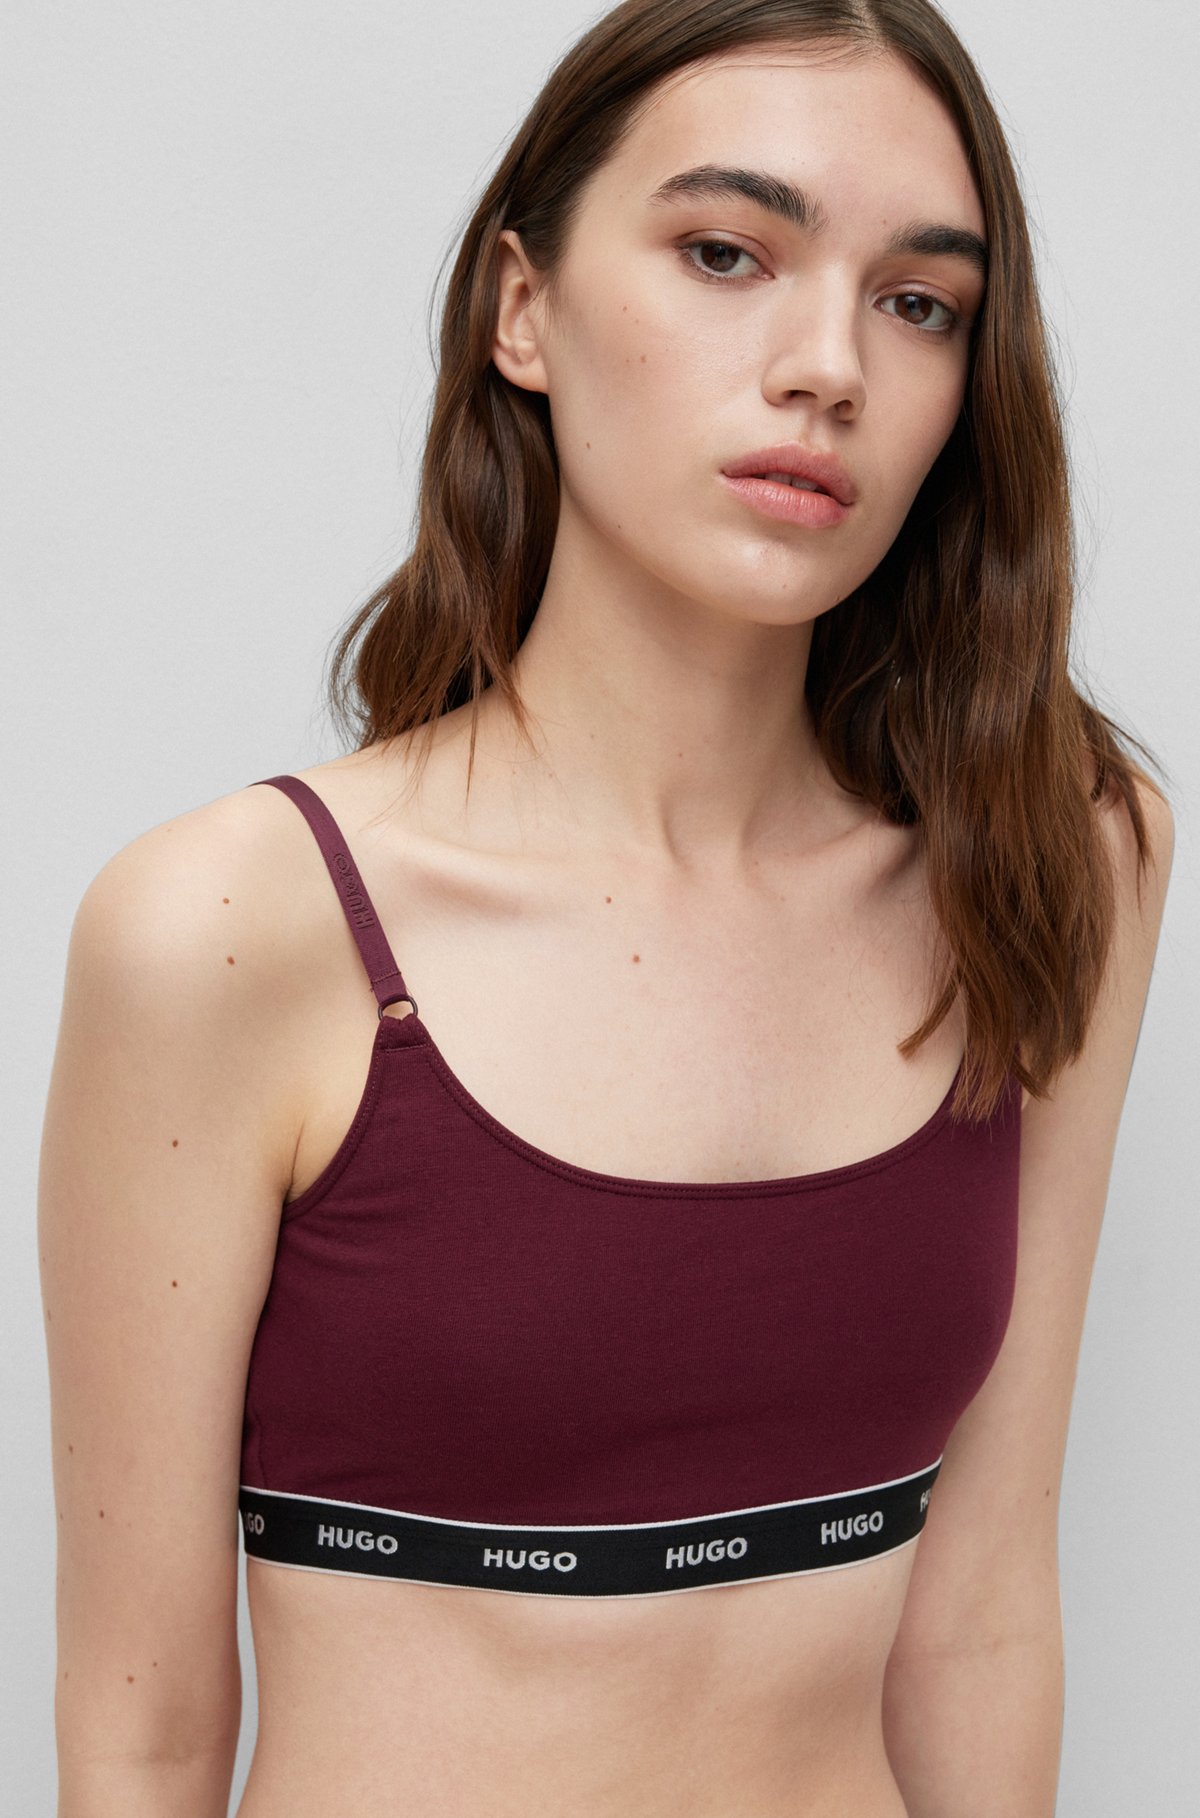 HUGO - Two-pack of stretch-cotton bralettes with logo band